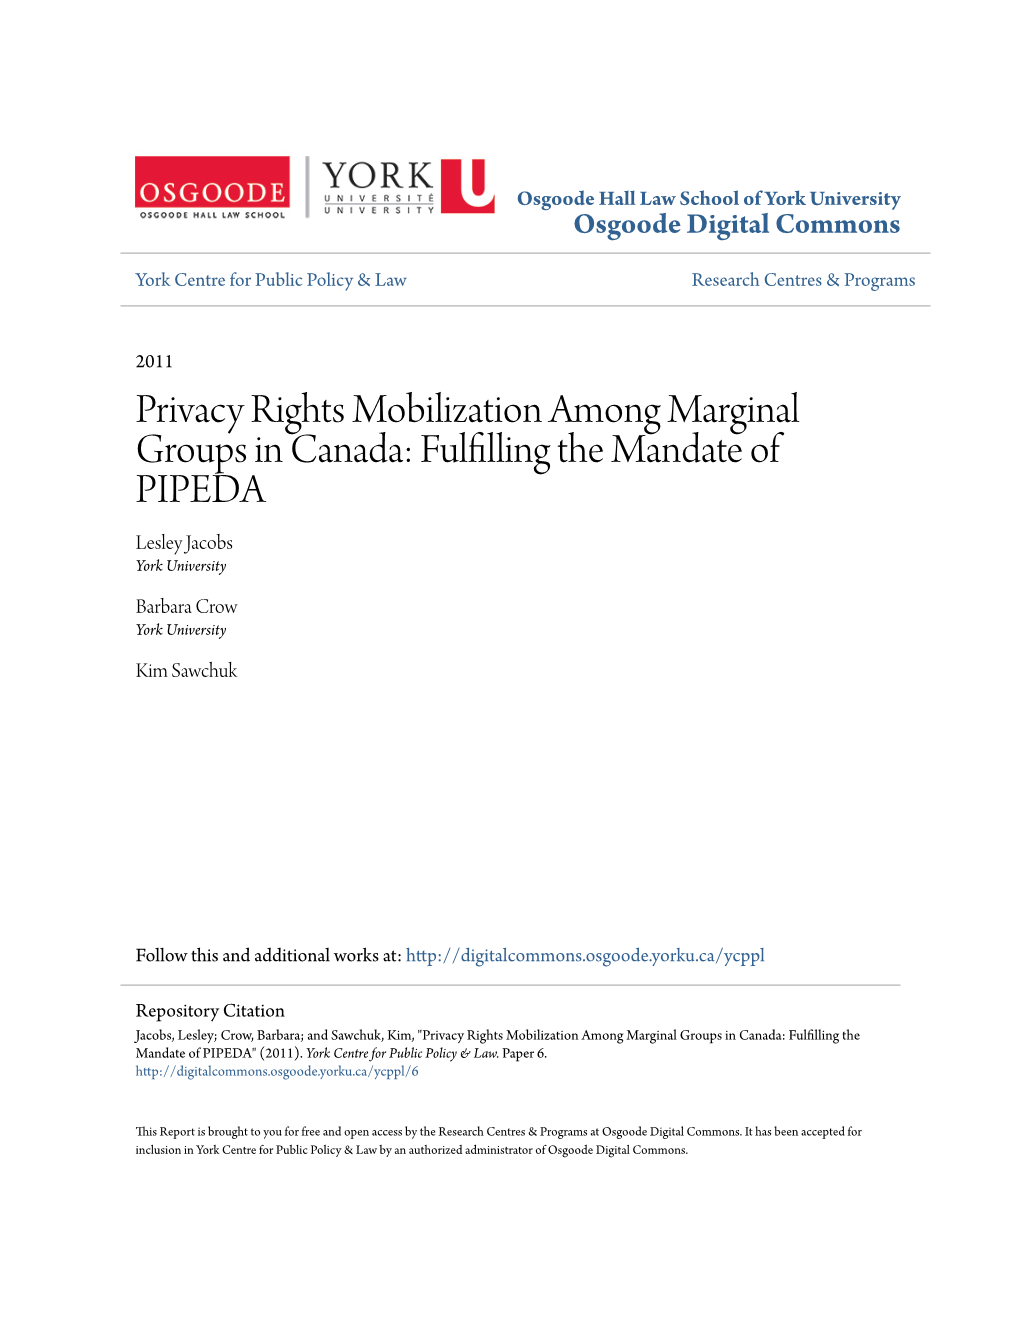 Fulfilling the Mandate of PIPEDA Lesley Jacobs York University